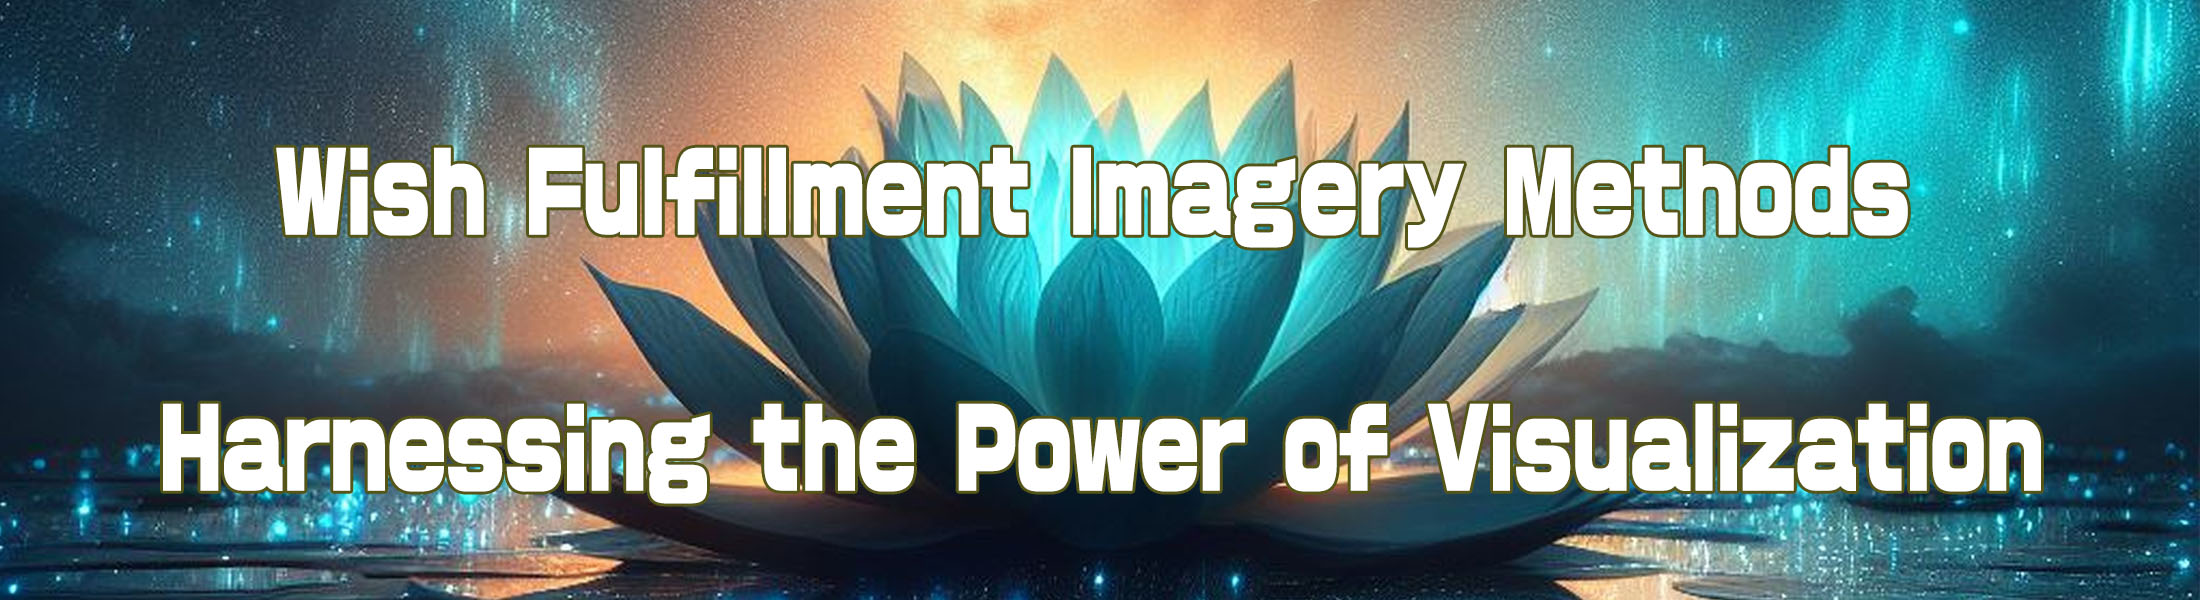 Wish Fulfillment Imagery Methods: Harnessing the Power of Visualization